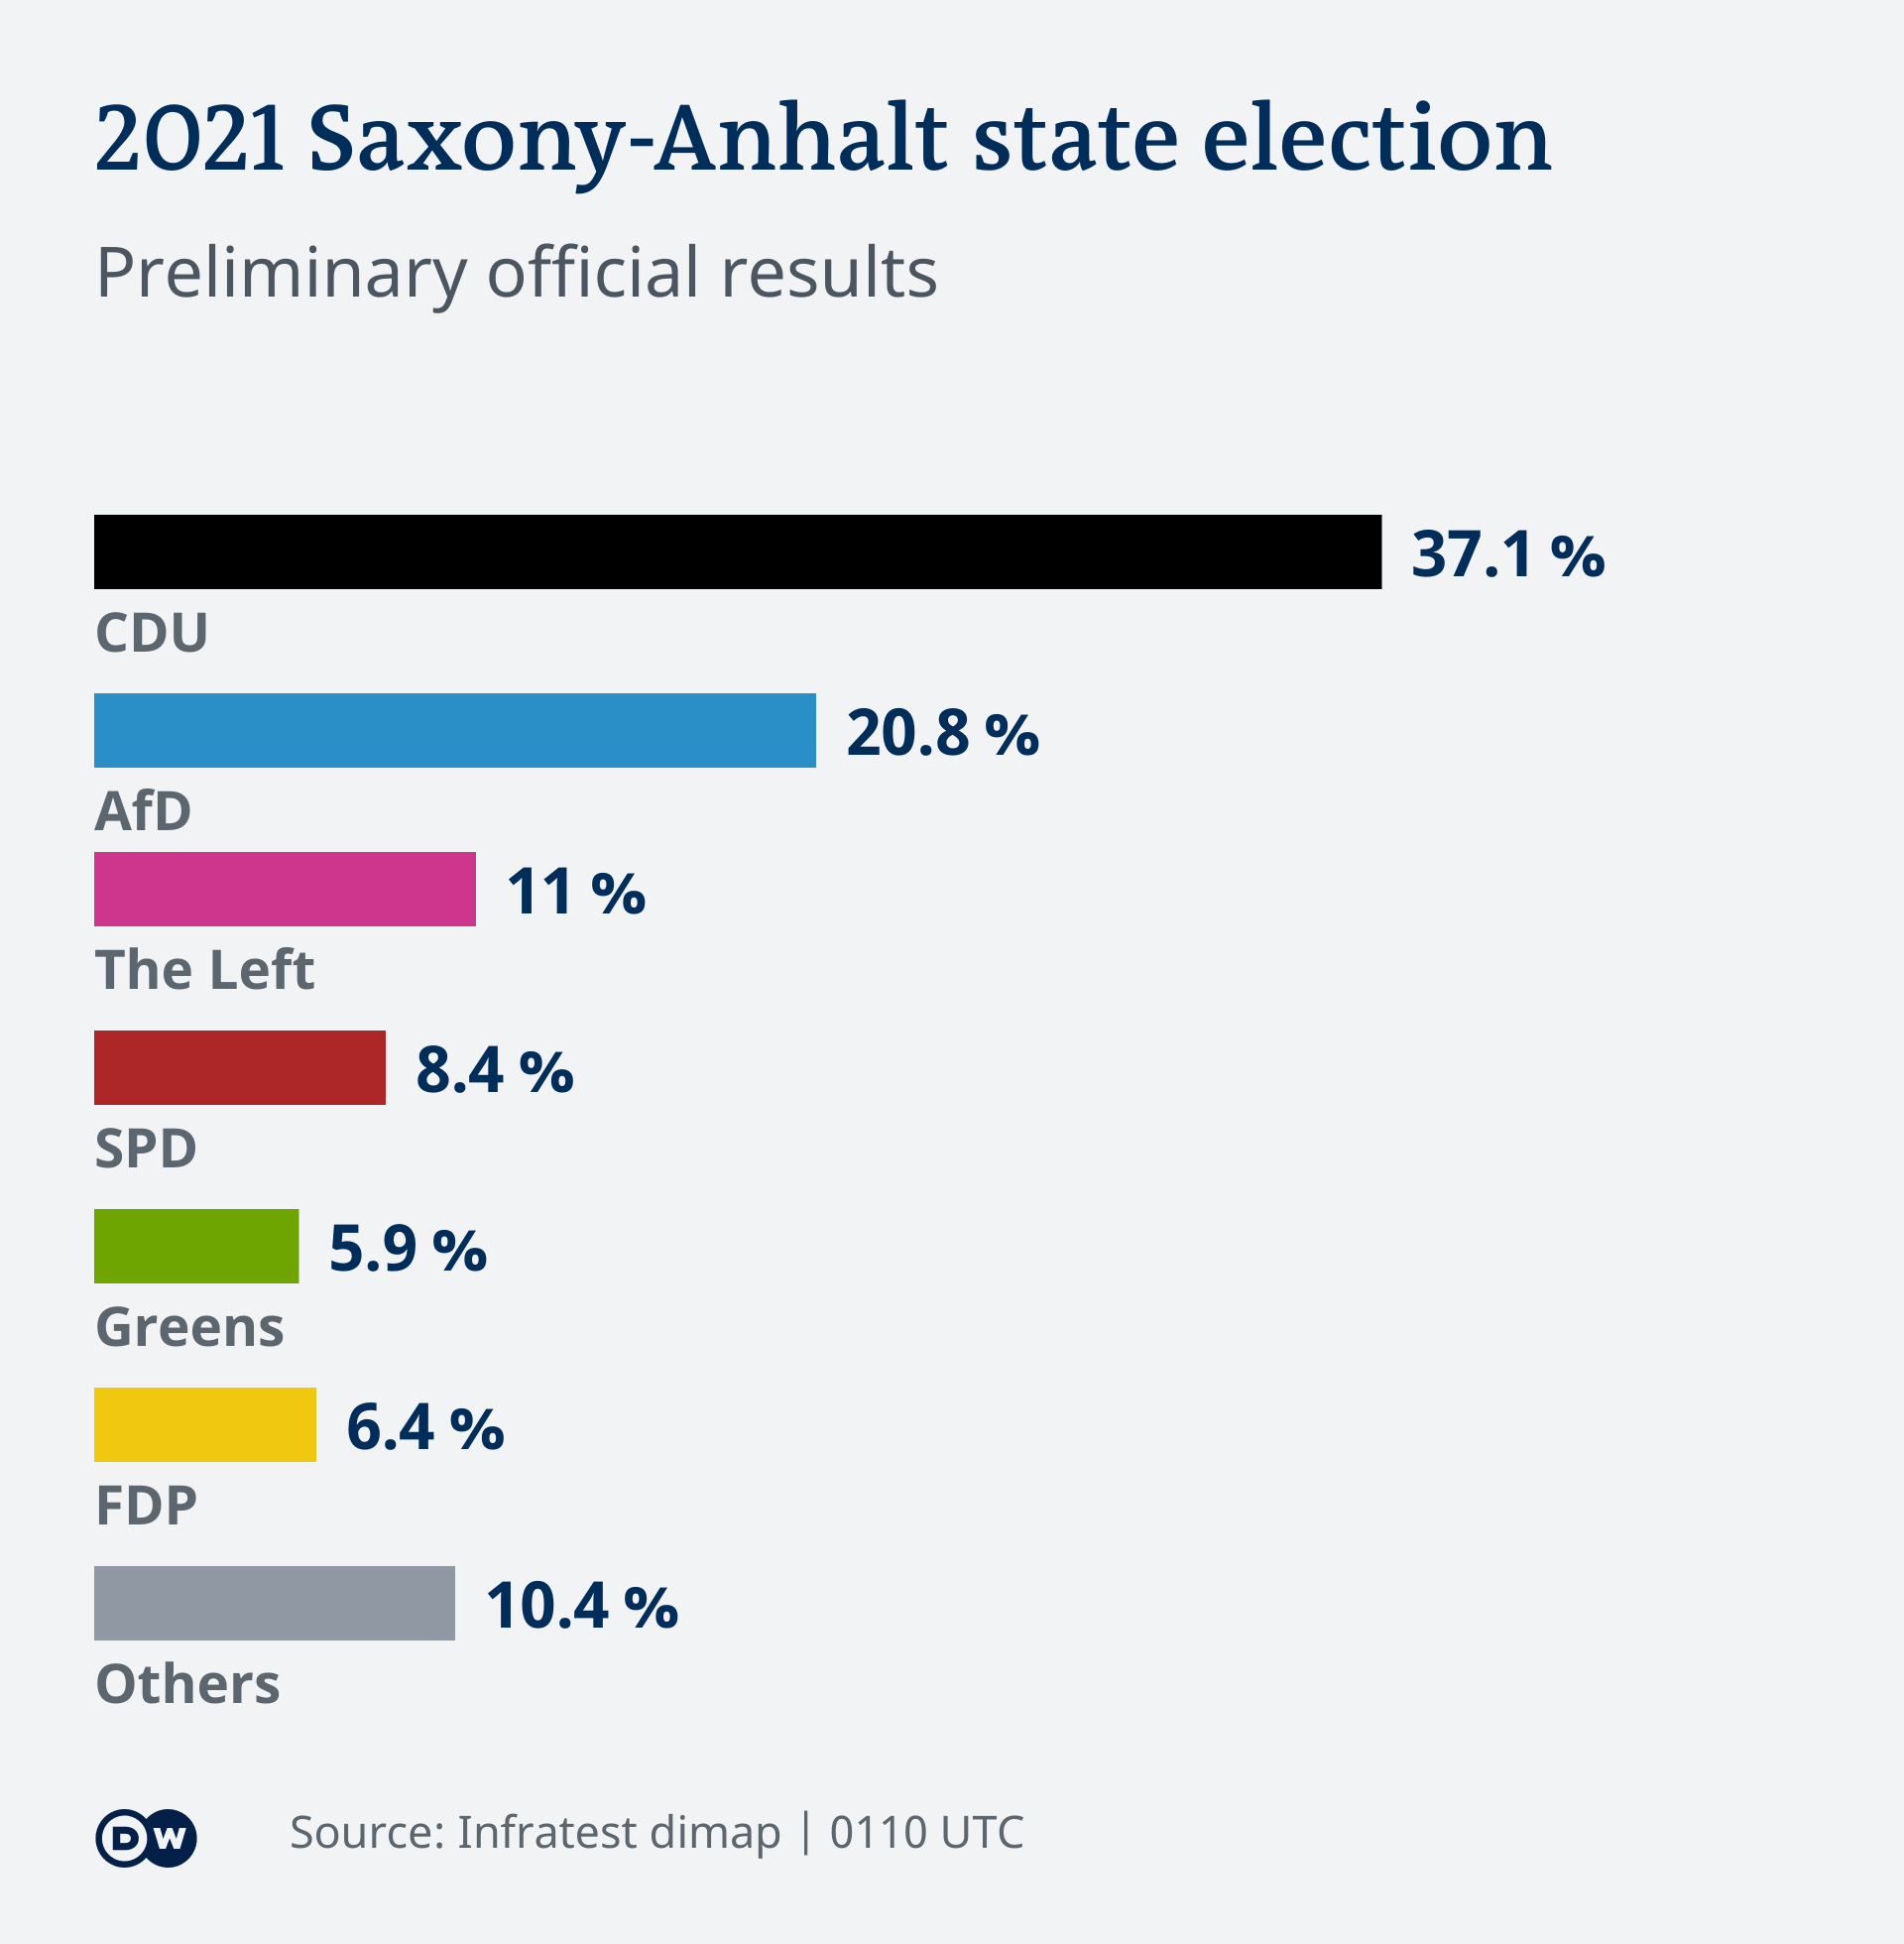 Preliminary official results of Saxony Anhalt state elections